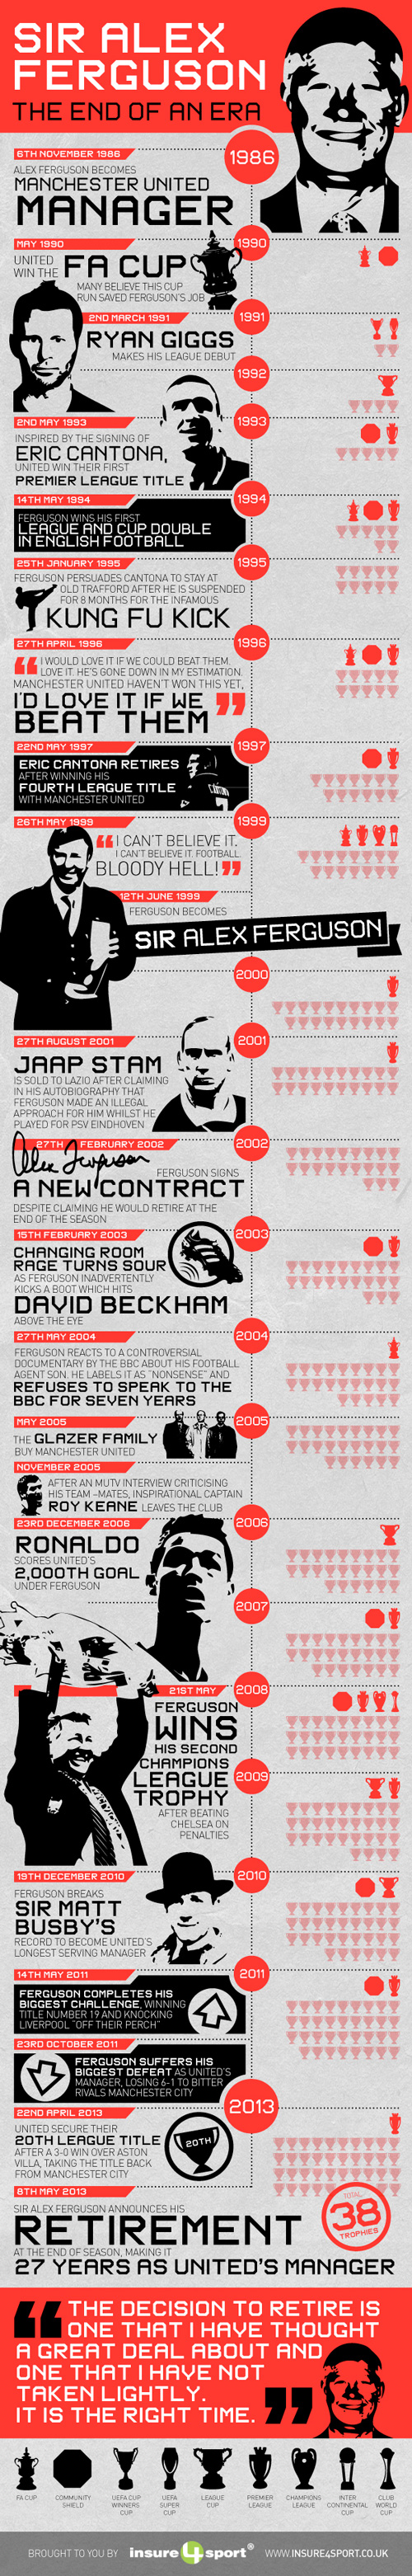 Farewell Fergie Infographic by insure4sport